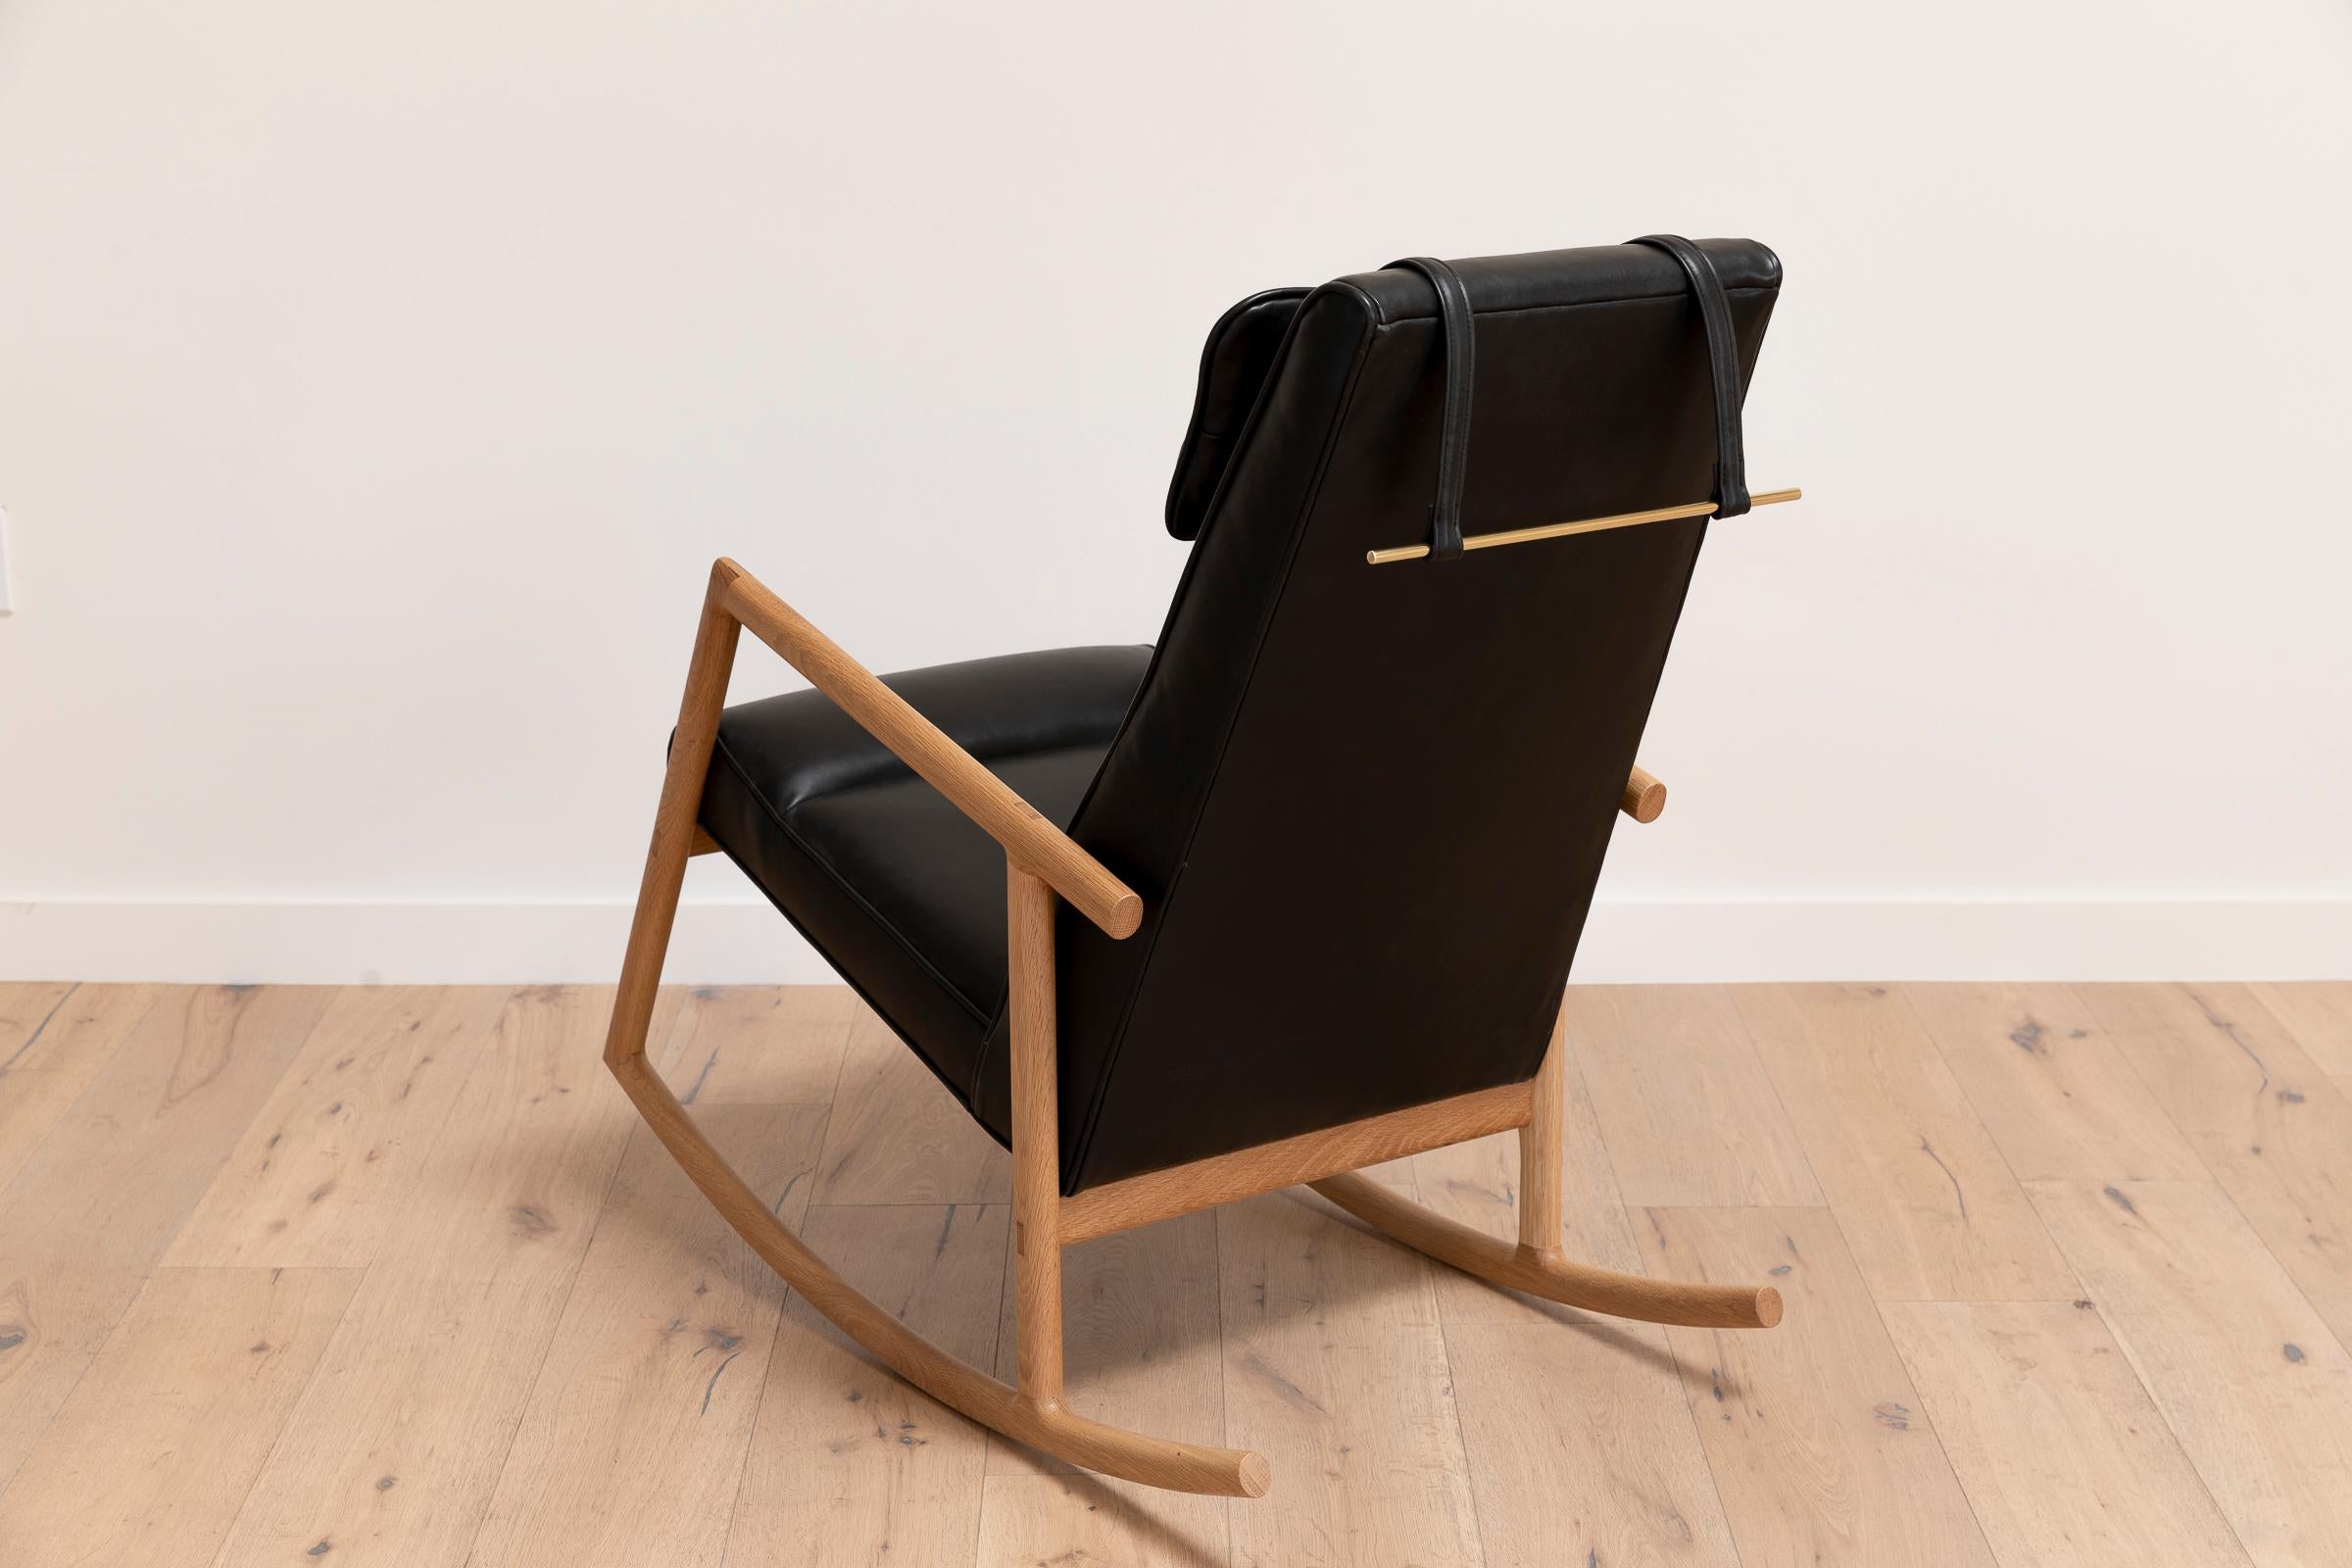 Contemporary Earl White Oak, Black Leather Moresby Rocking Chair For Sale